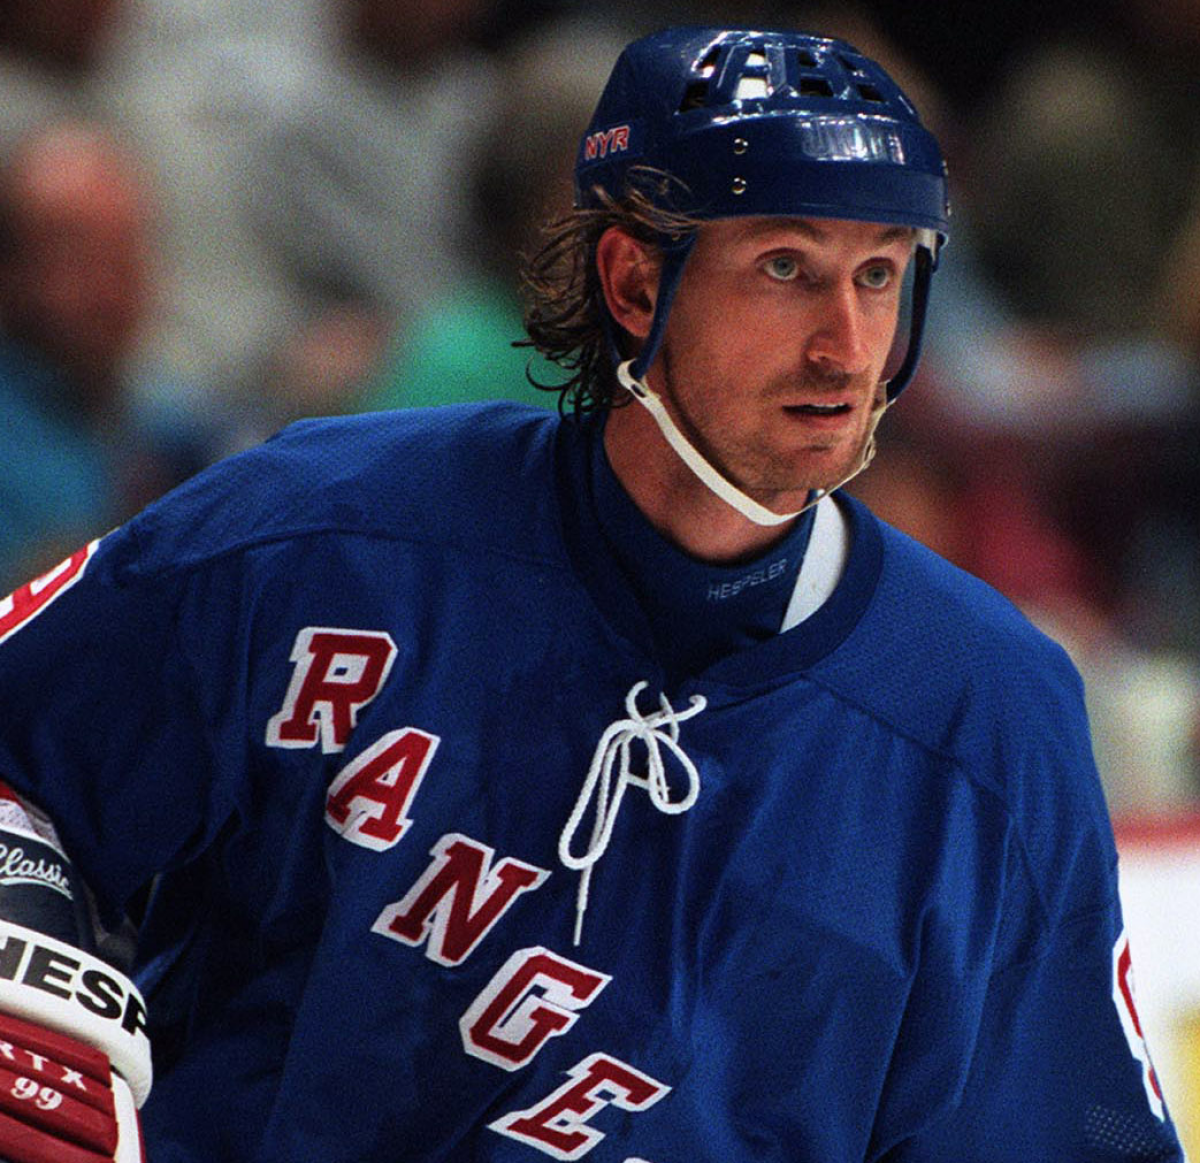 25 greatest NHL players of all time, ranked